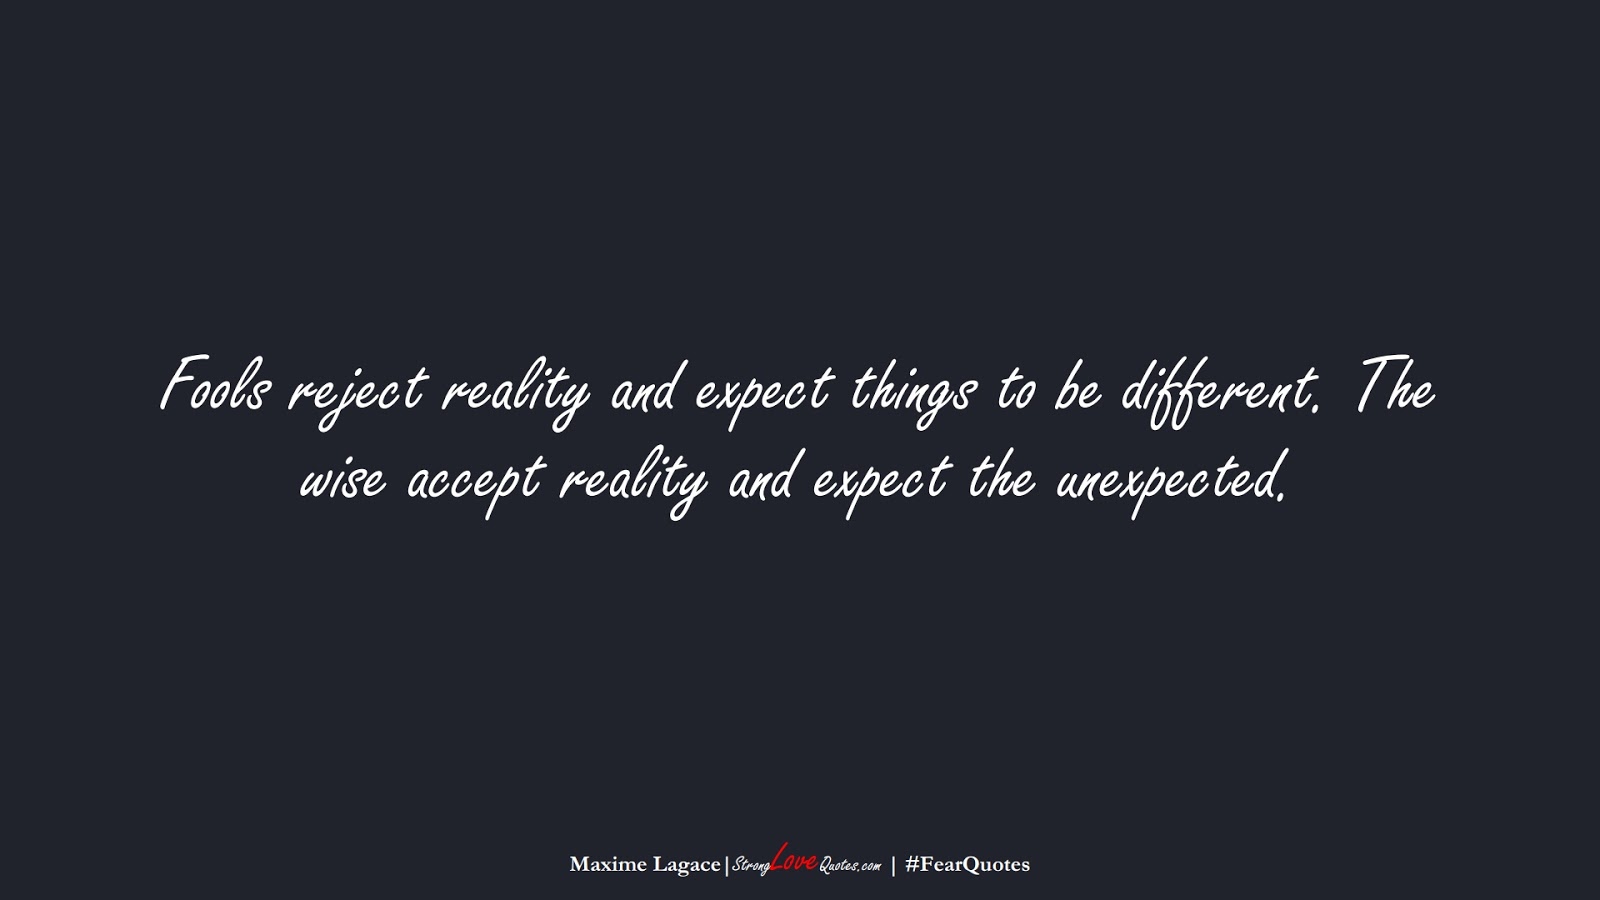 Fools reject reality and expect things to be different. The wise accept reality and expect the unexpected. (Maxime Lagace);  #FearQuotes